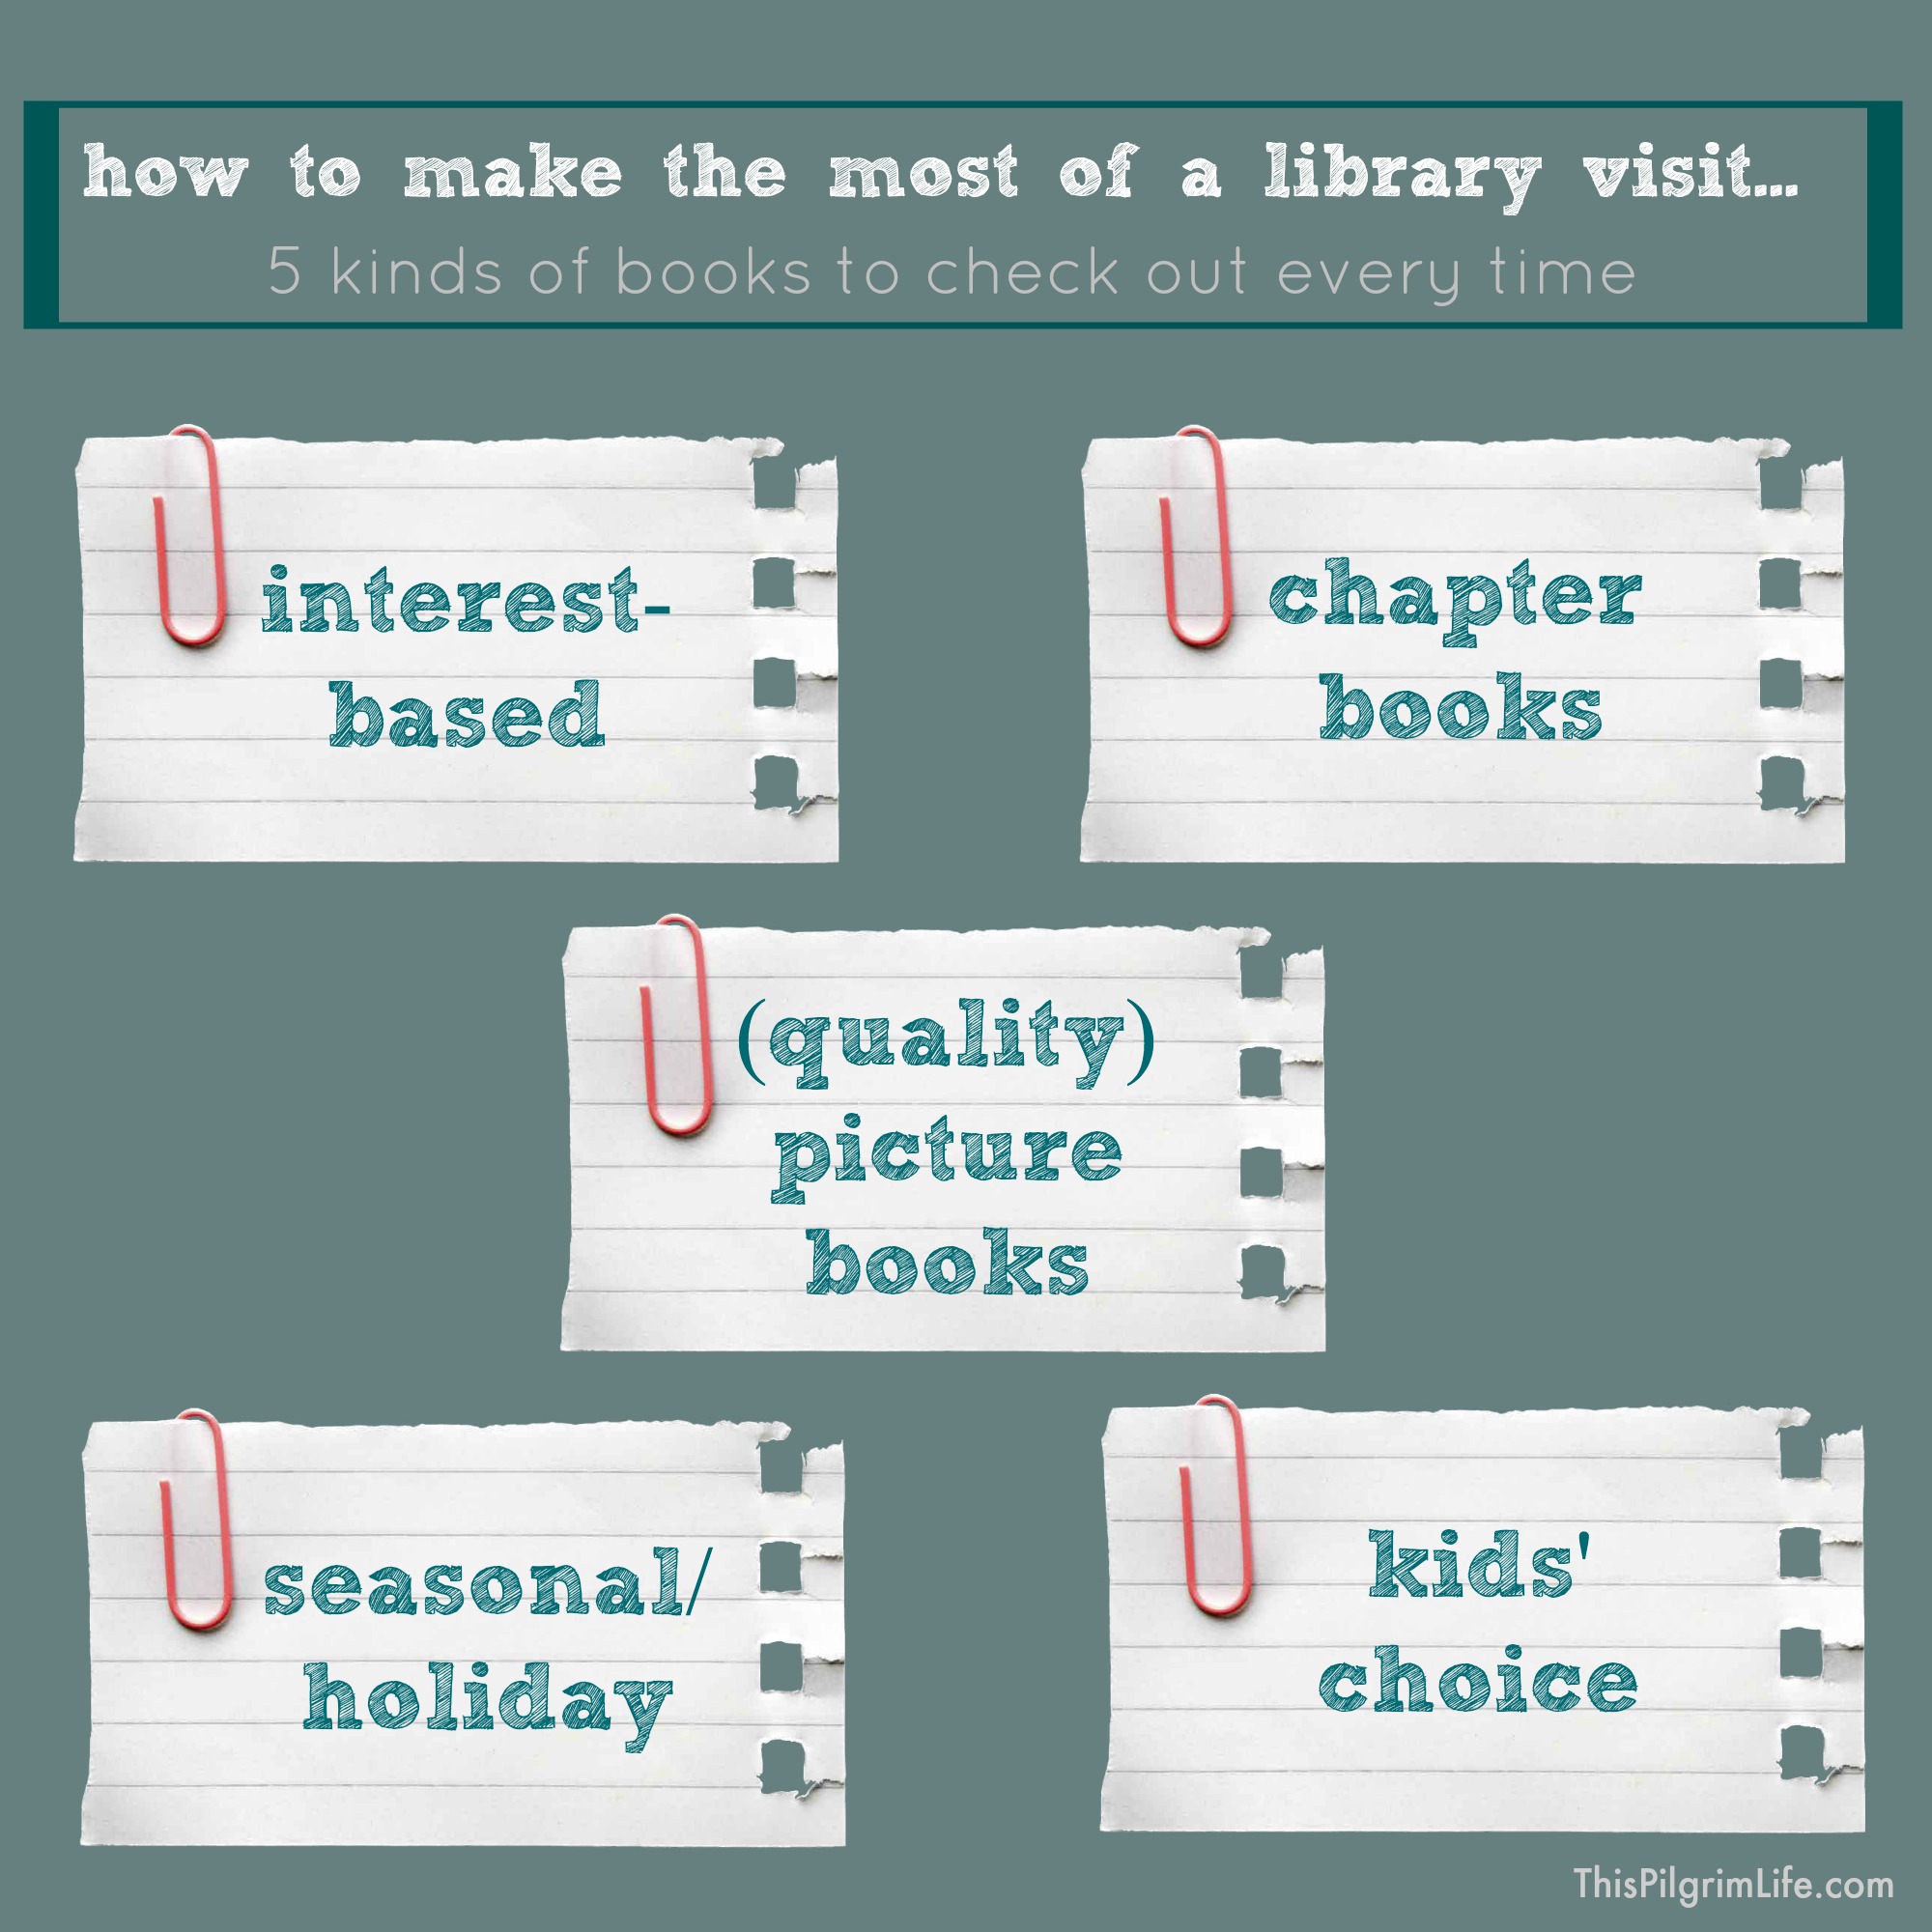 How to Make the Most of a Library Visit: 5 Kinds of Books to Check Out Every Time 